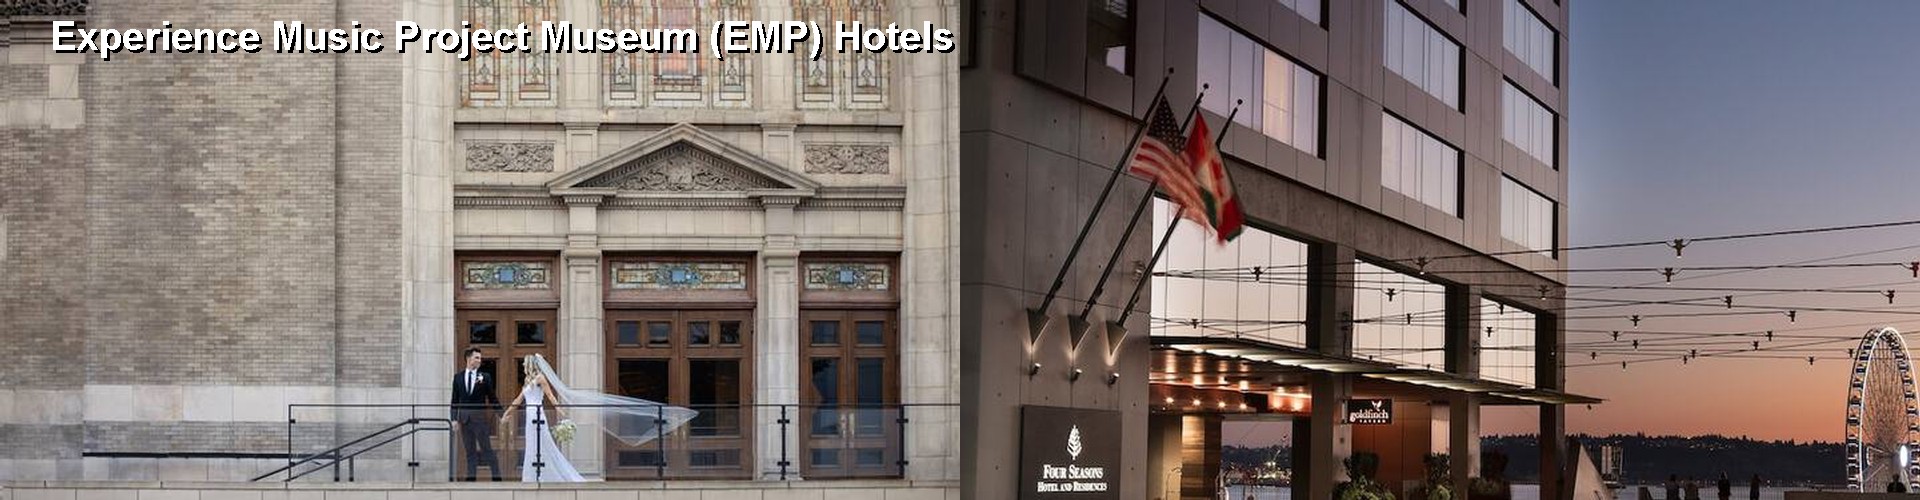 4 Best Hotels near Experience Music Project Museum (EMP)